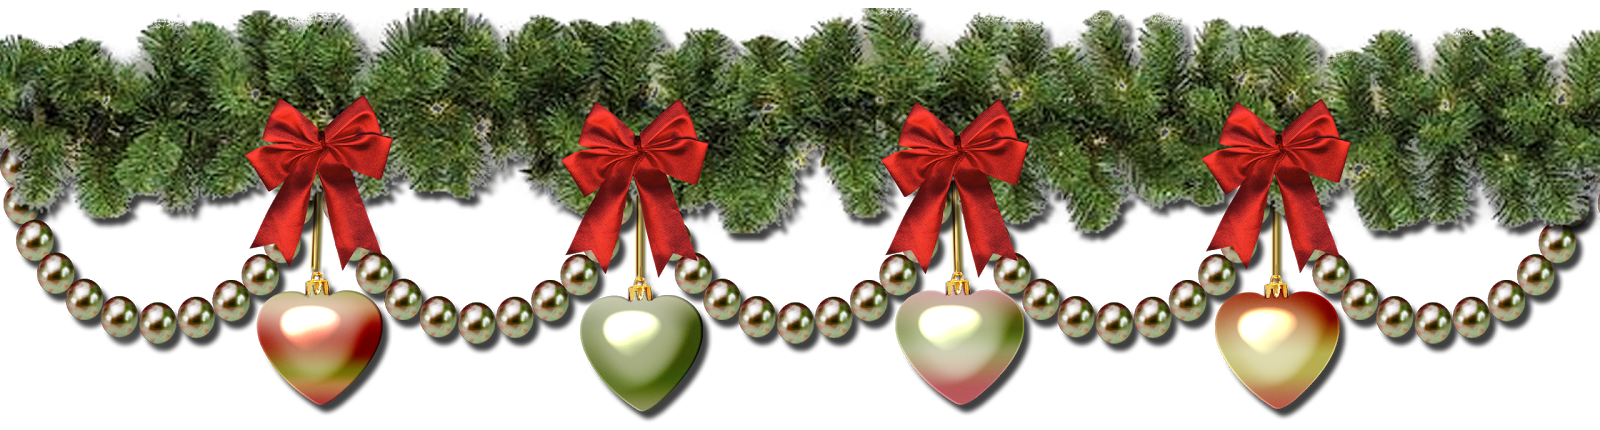 Christmas Garland PNG Image File - PNG All